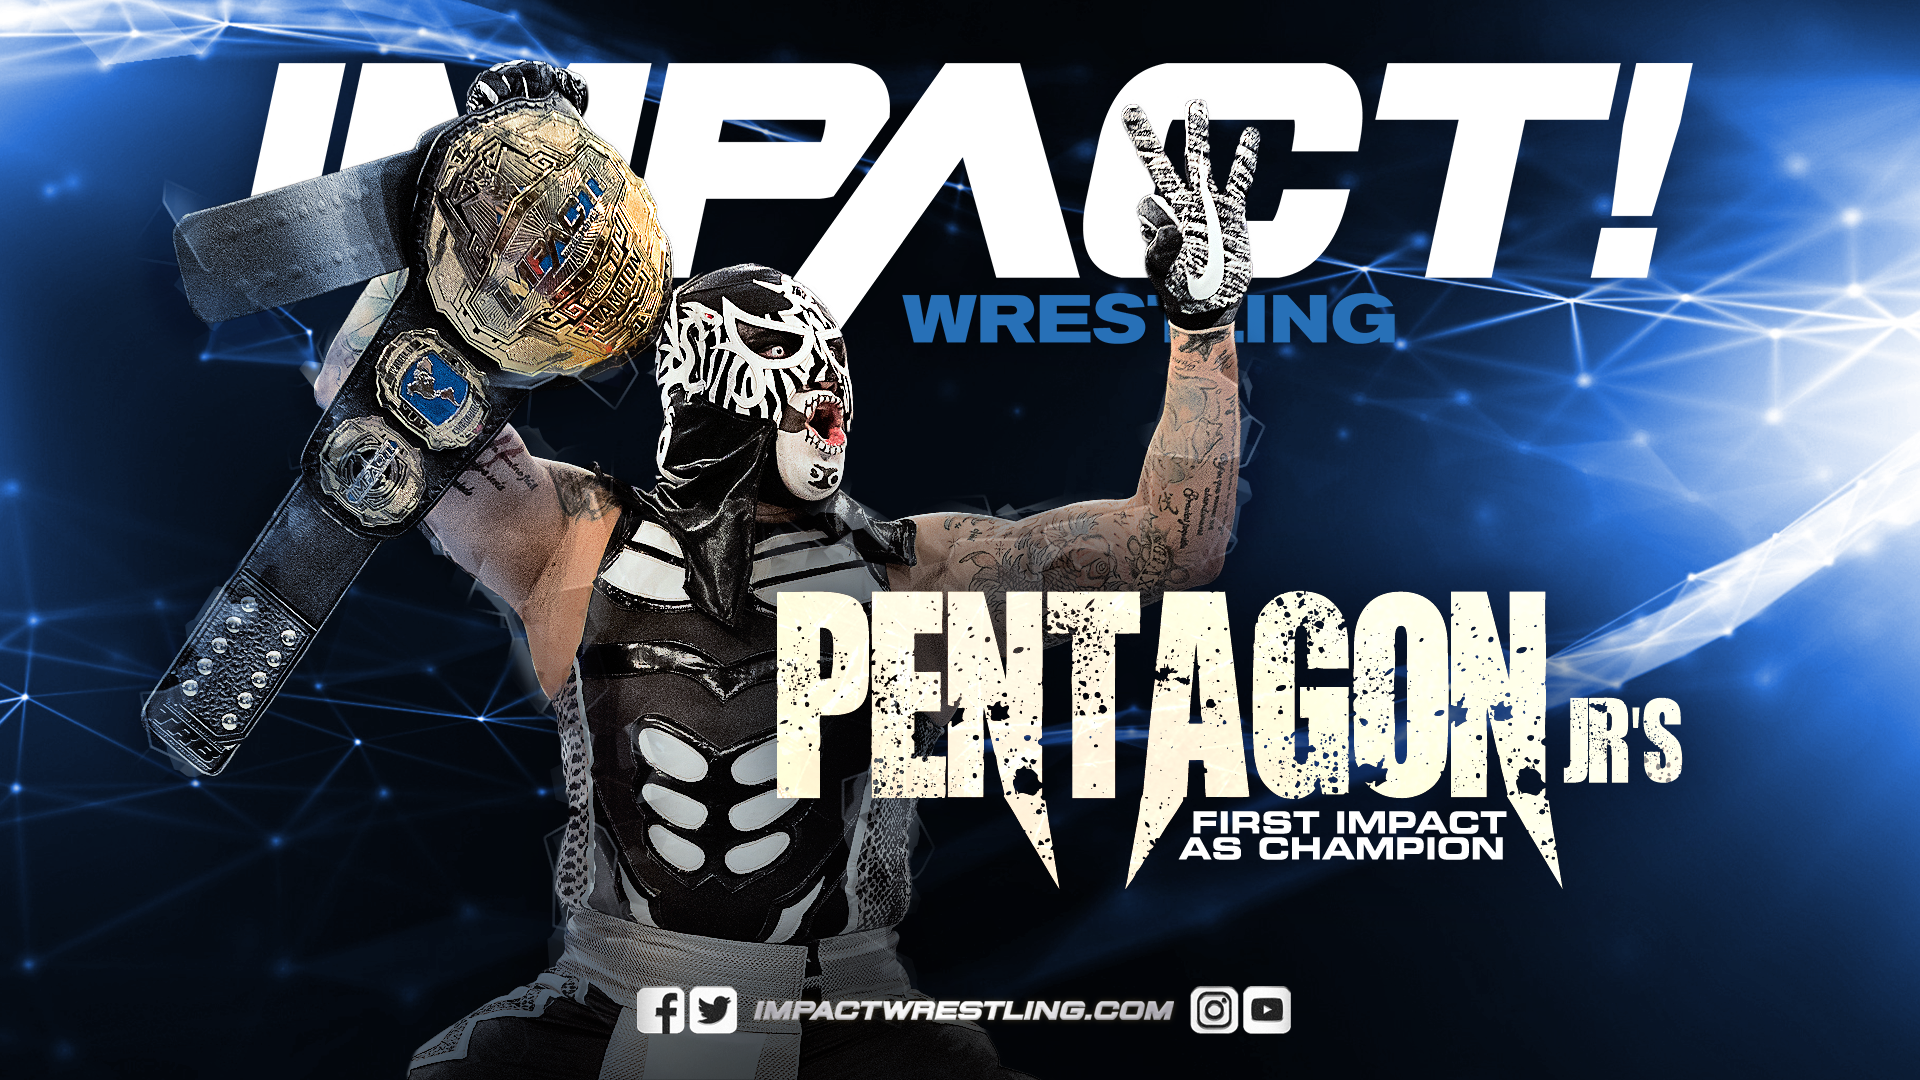 Pentagon Jr On Being Recognized As A Worldwide Name w/ Impact Wrestling, Having The Support Of Konnan, Rey Mysterio